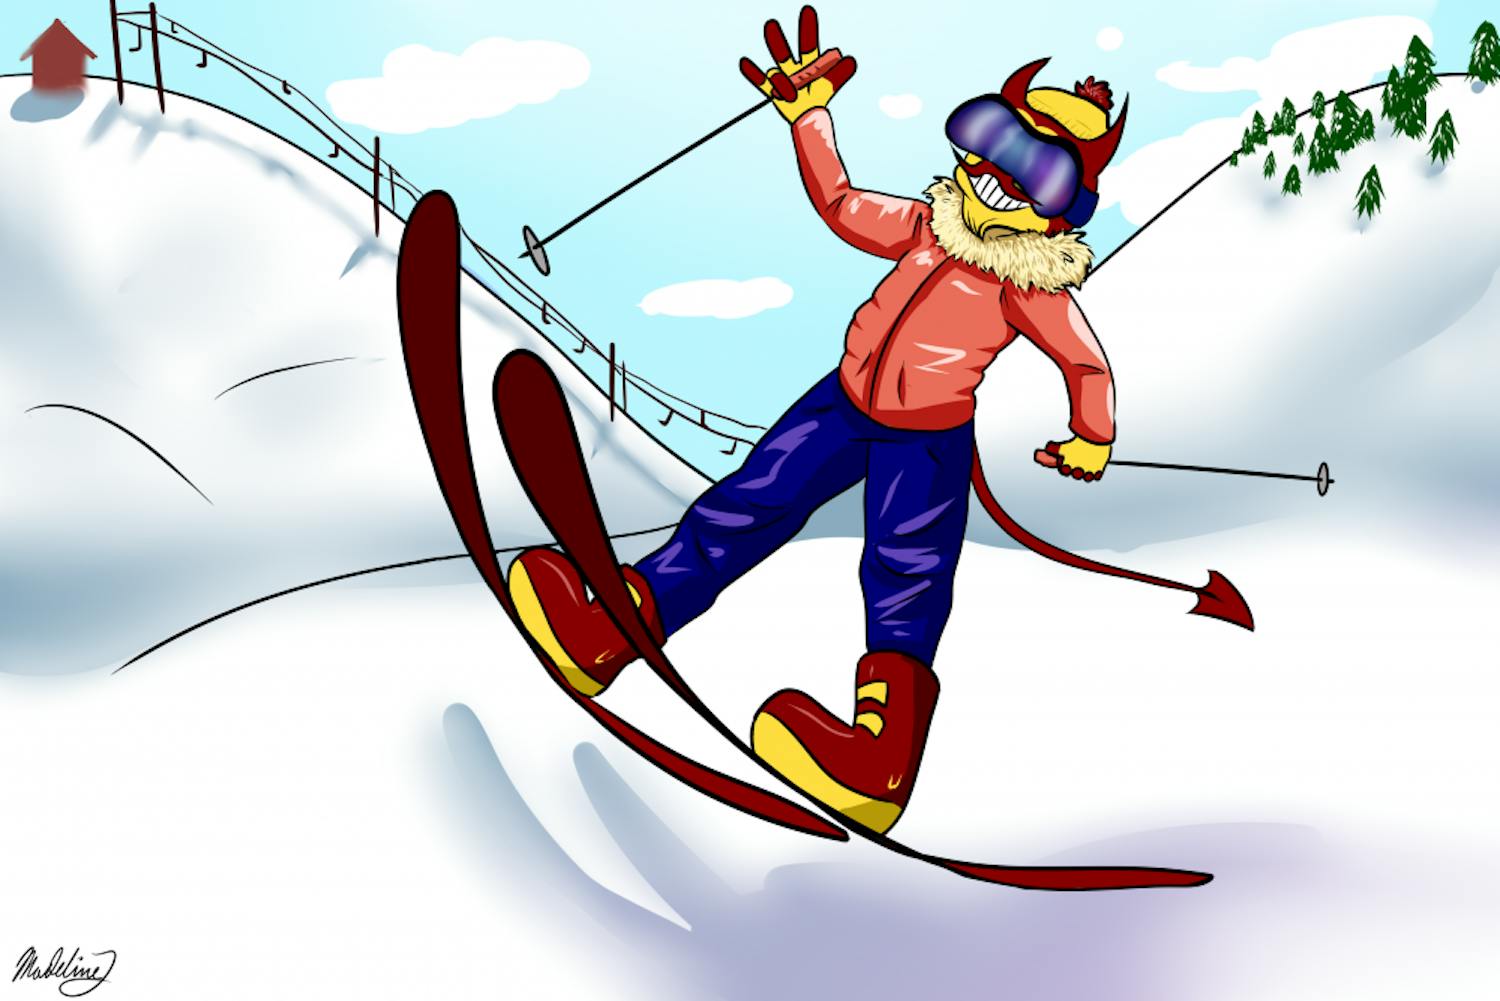 sparky skiing